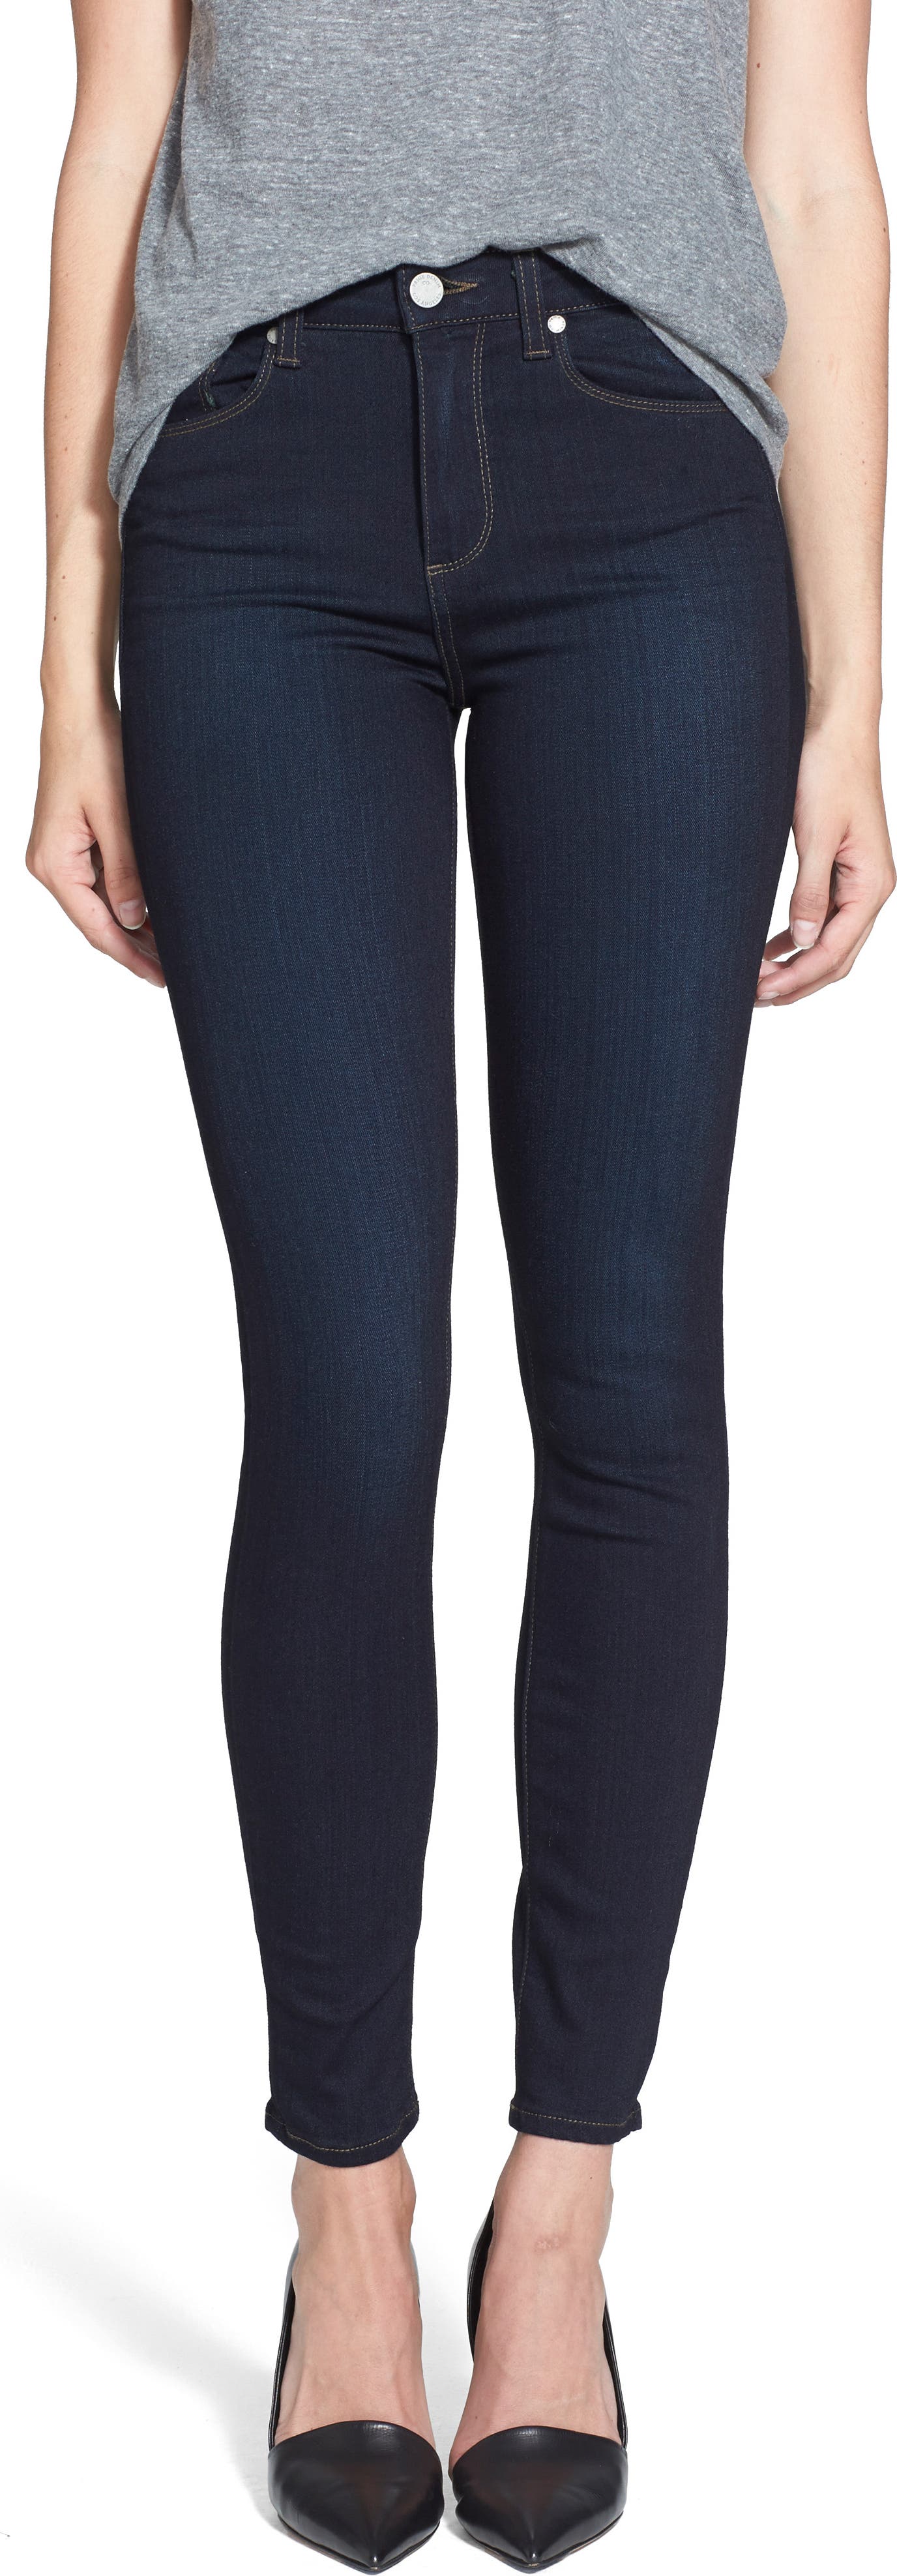 PAIGE Womens Hoxton Ultra Skinny Jeans 